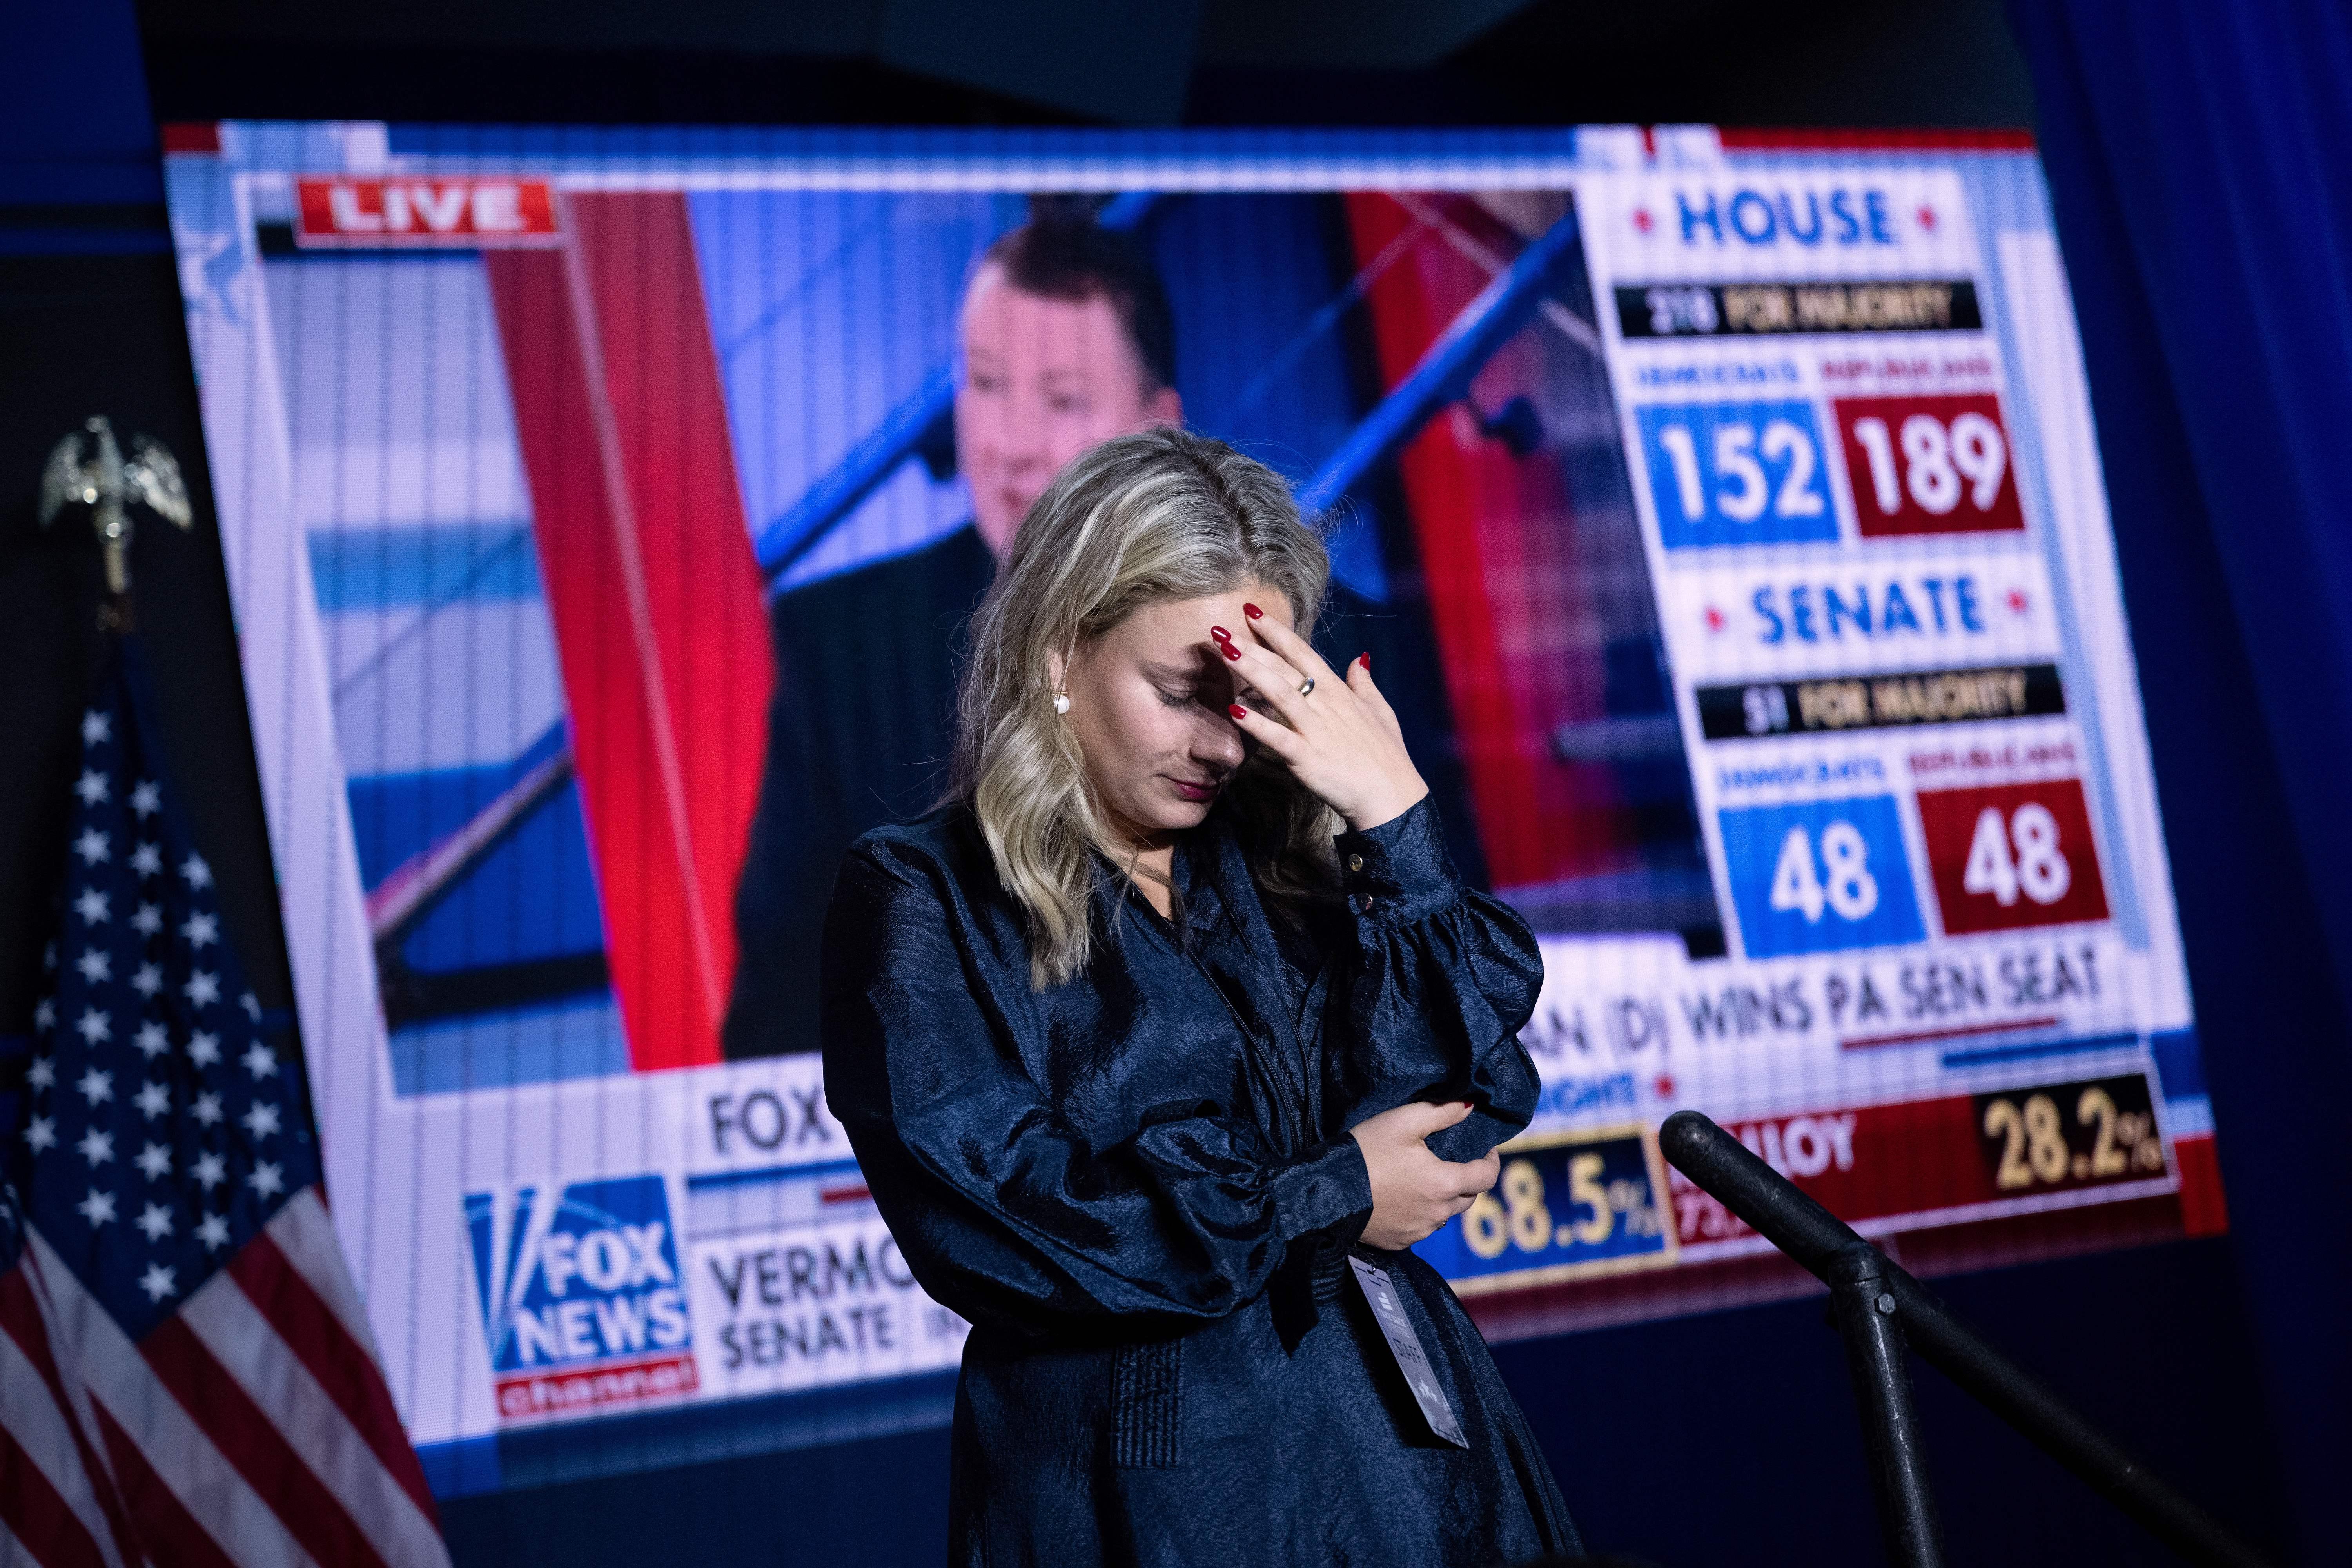 A blond woman holds her head in her hands in front of a TV showing the returns from Fox News.